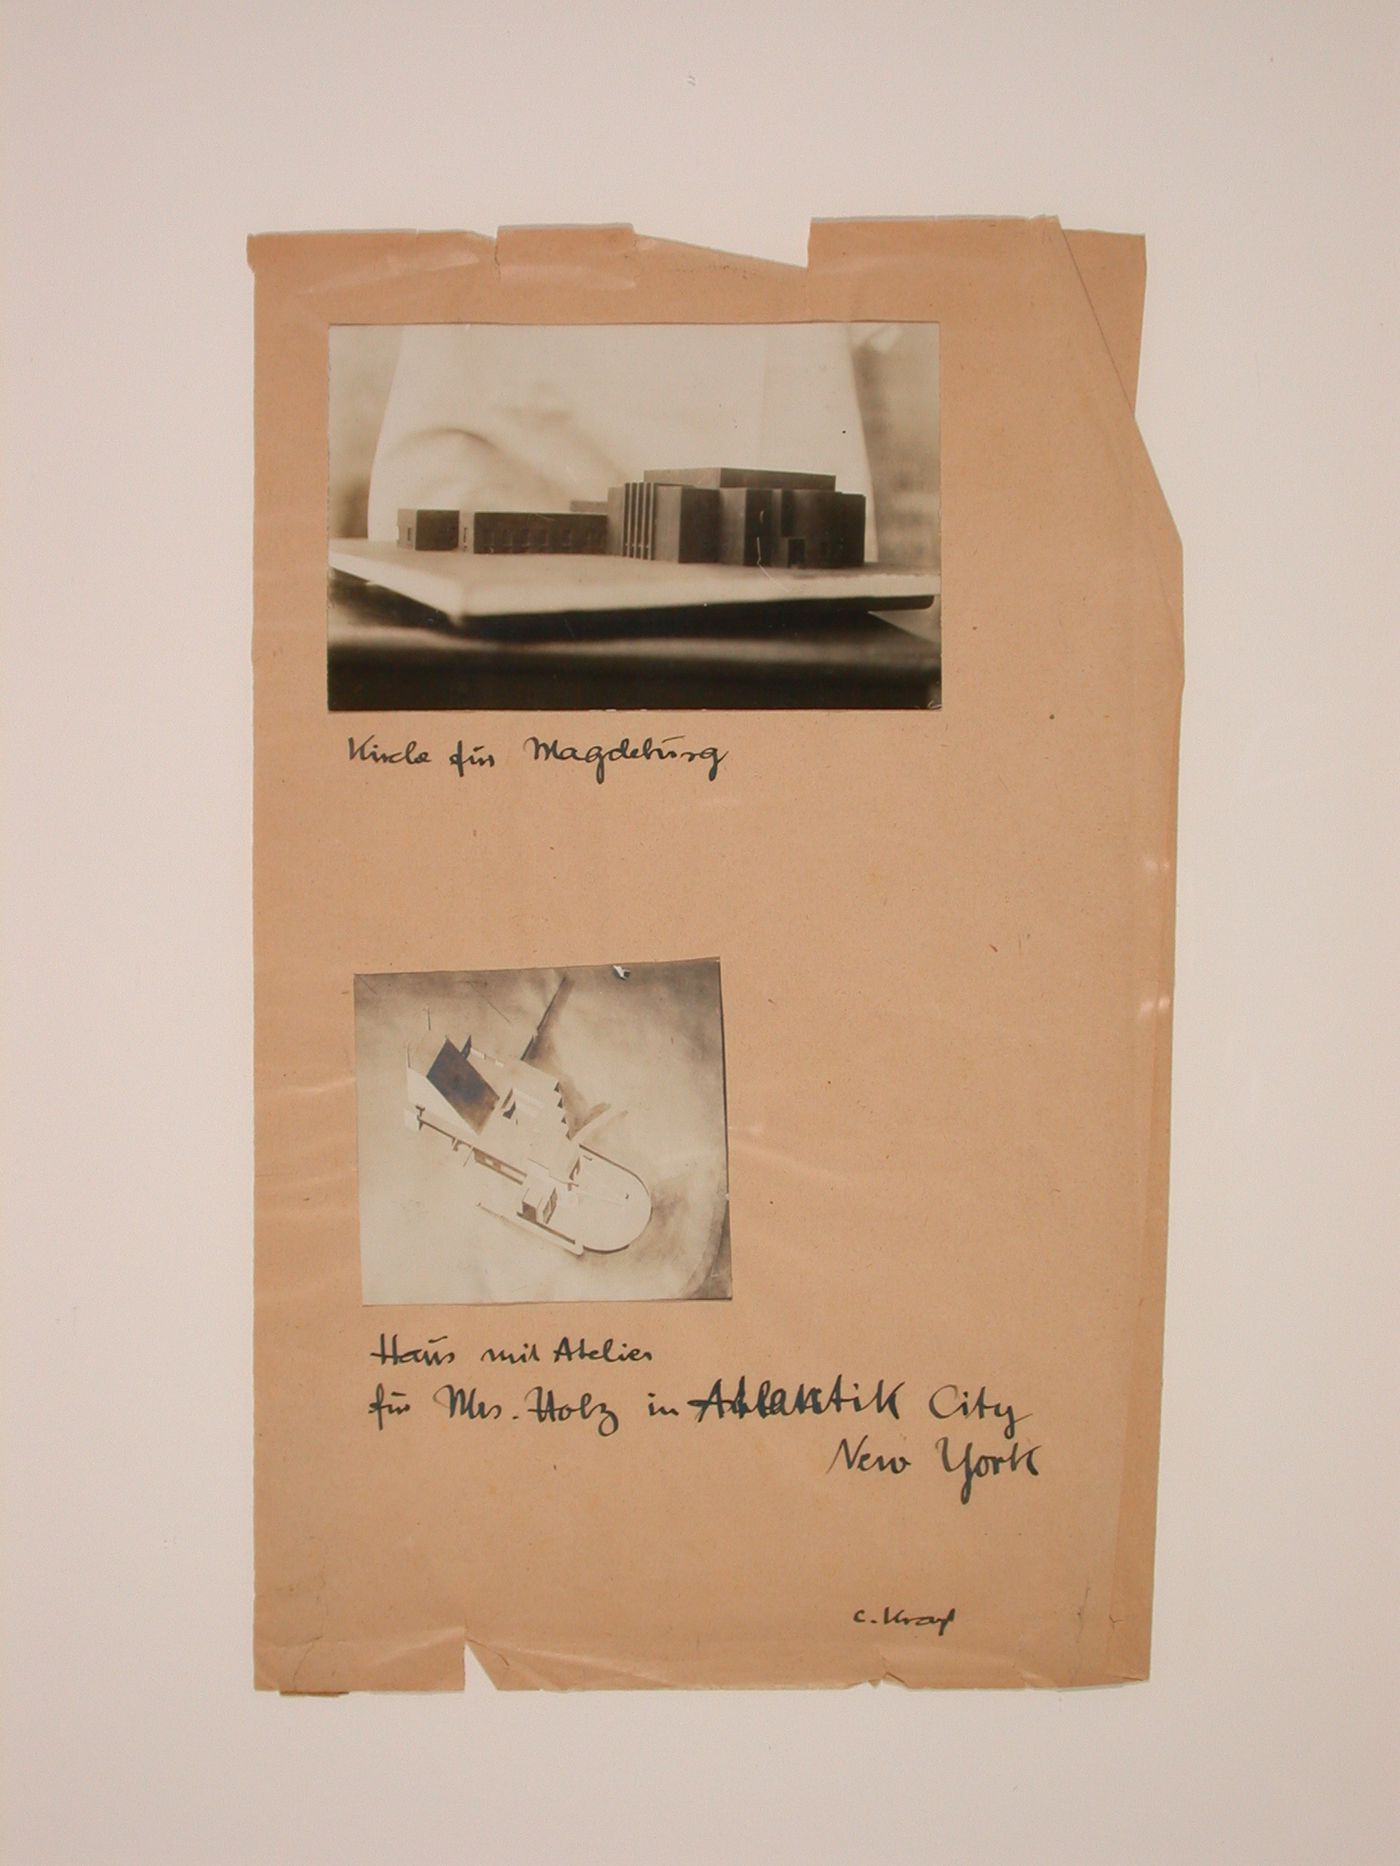 Photographs of the models for a building in Magdeburg, Germany and for a workshop for in Atlantic City, United States